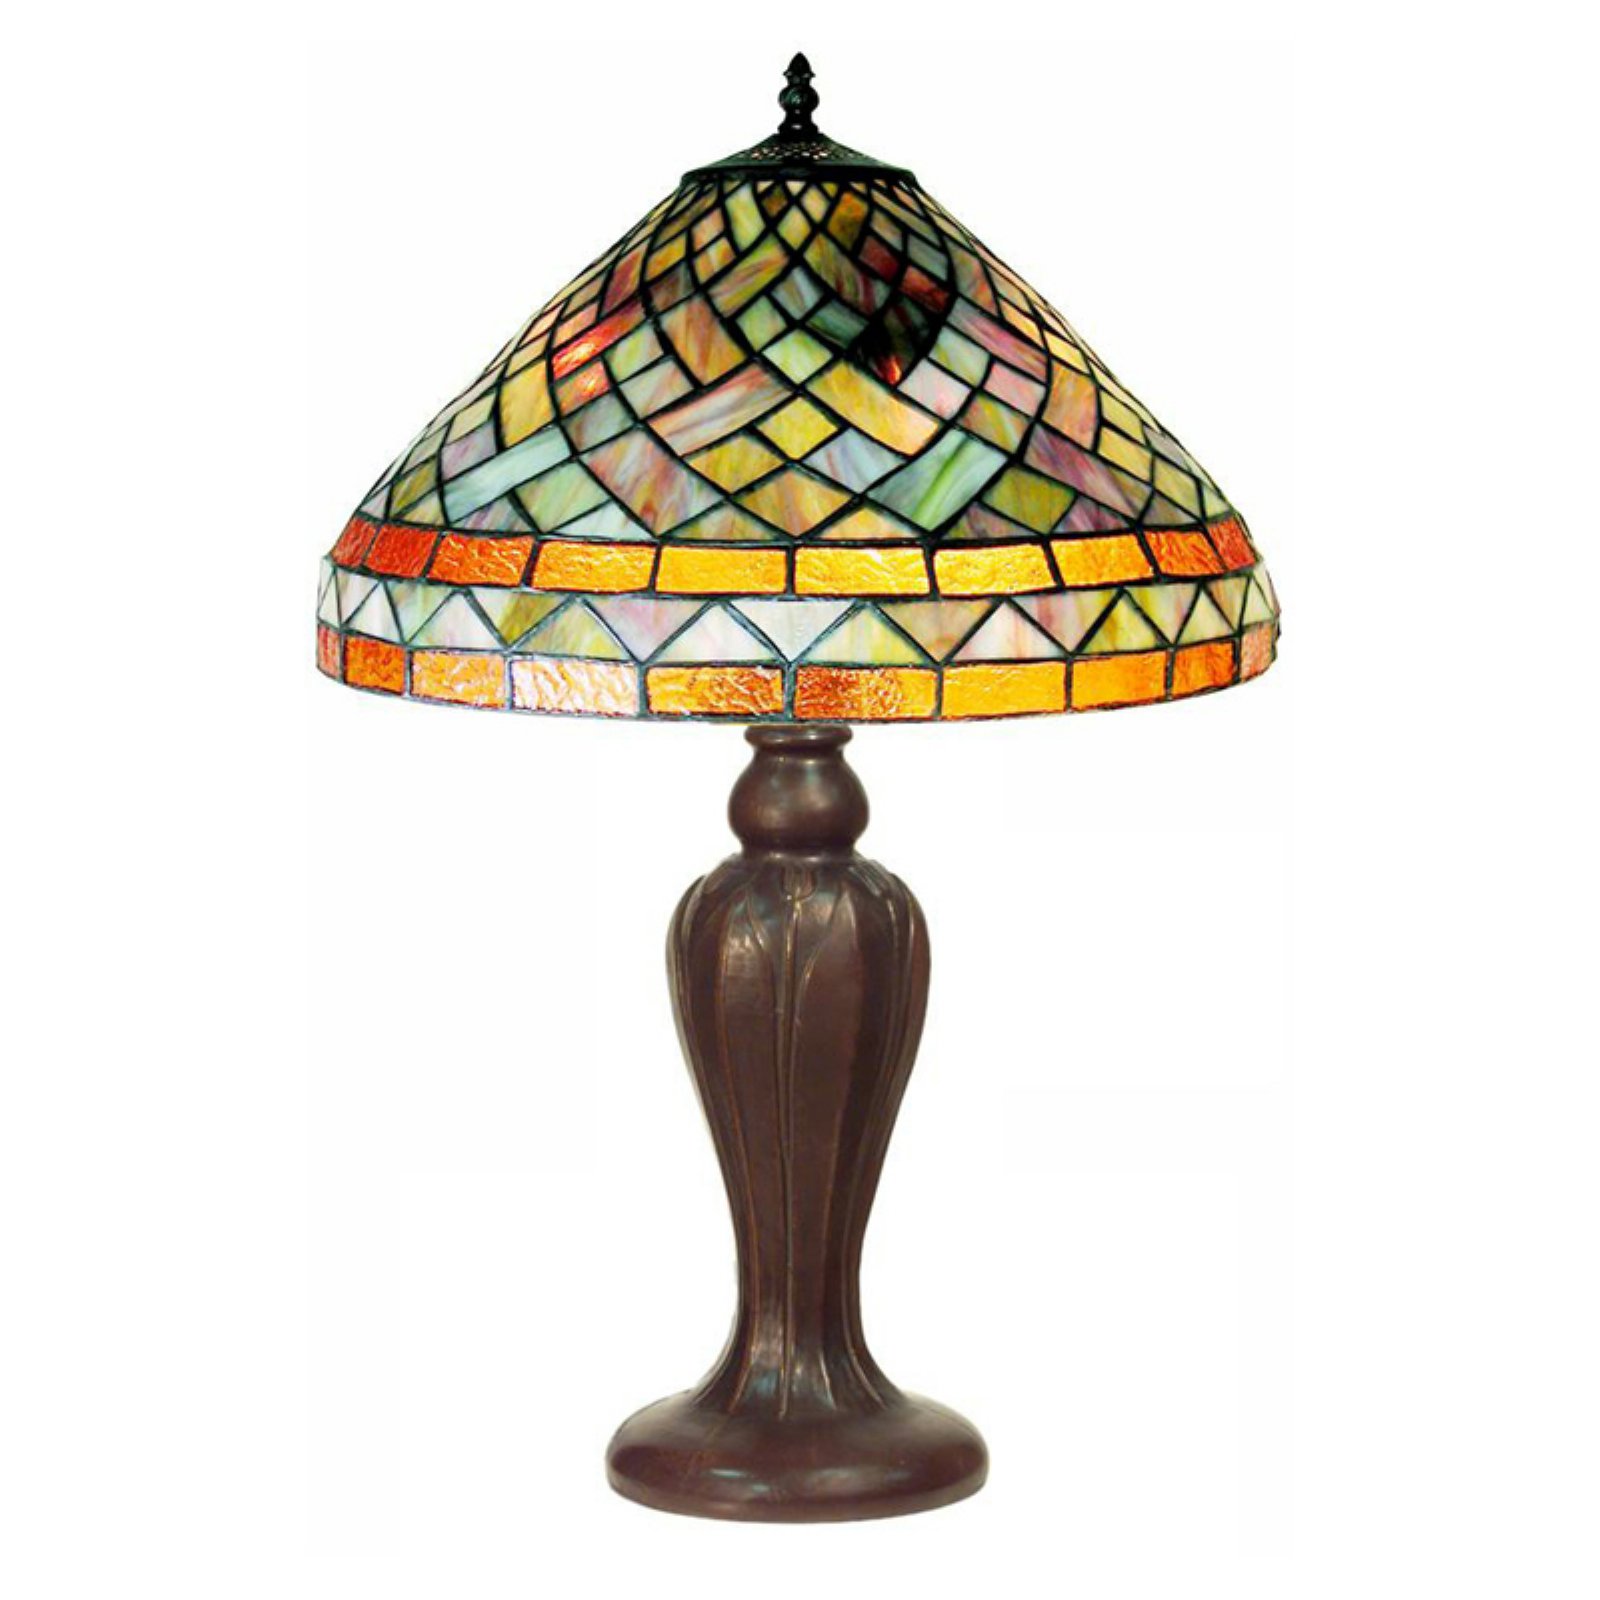 Famous Brand-Style Geometric Table Lamp